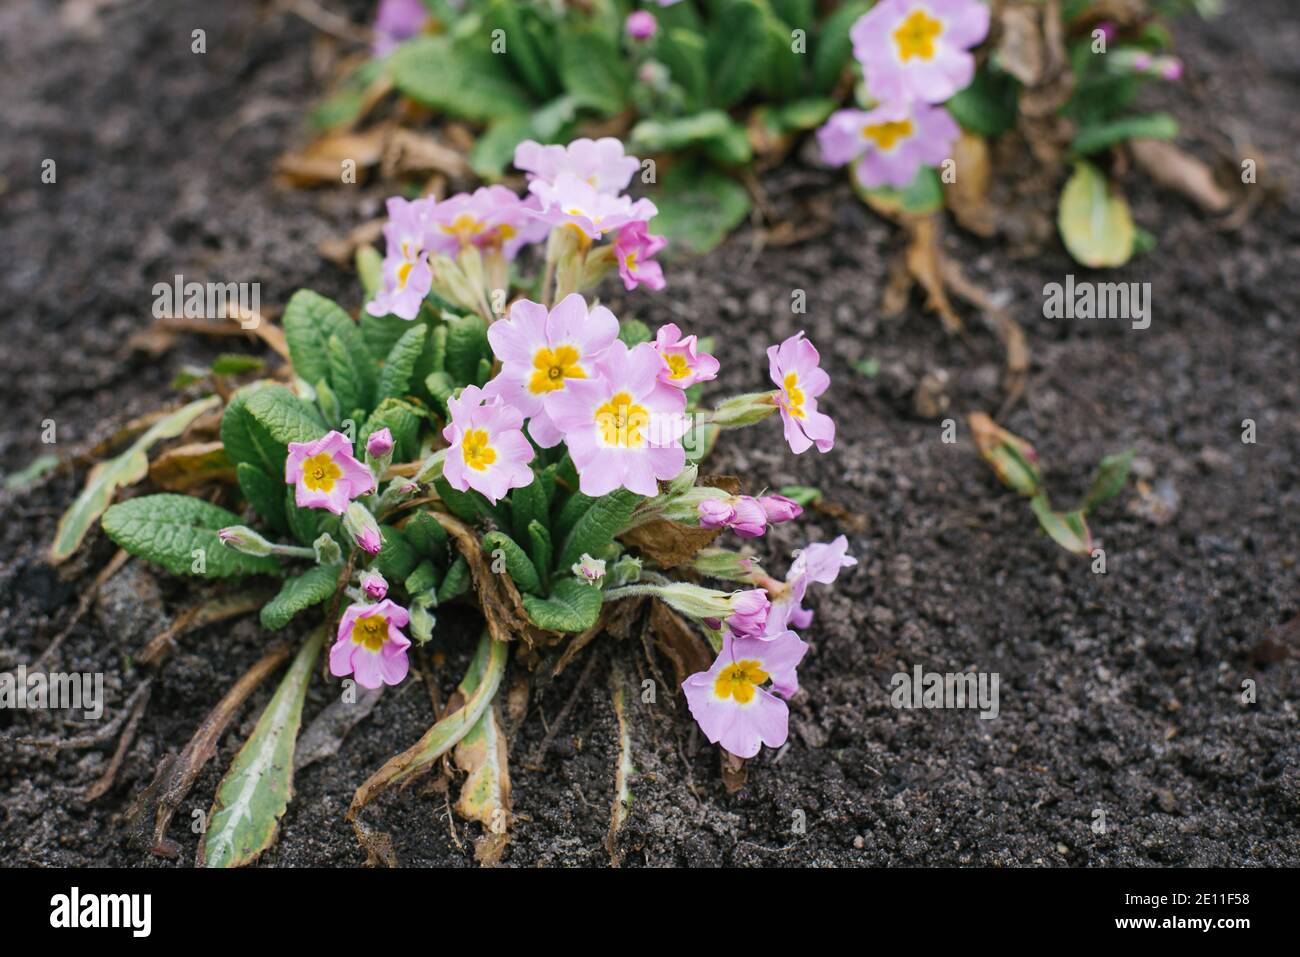 Delicate pink primrose flowers grow in the garden on a Sunny spring day Stock Photo